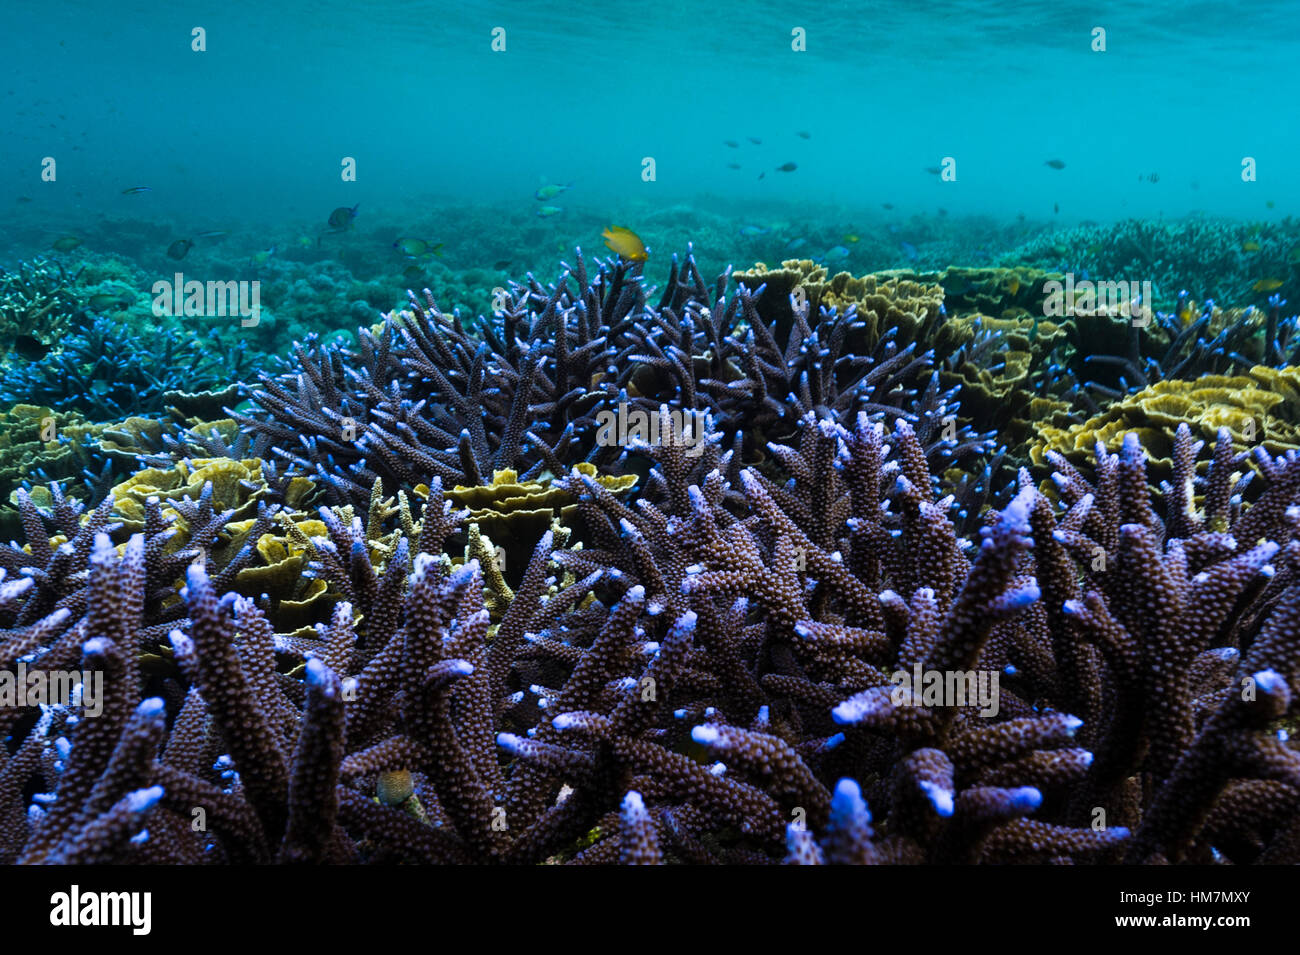 A forest of bright purple Staghorn corals growing on a shallow reef. Stock Photo